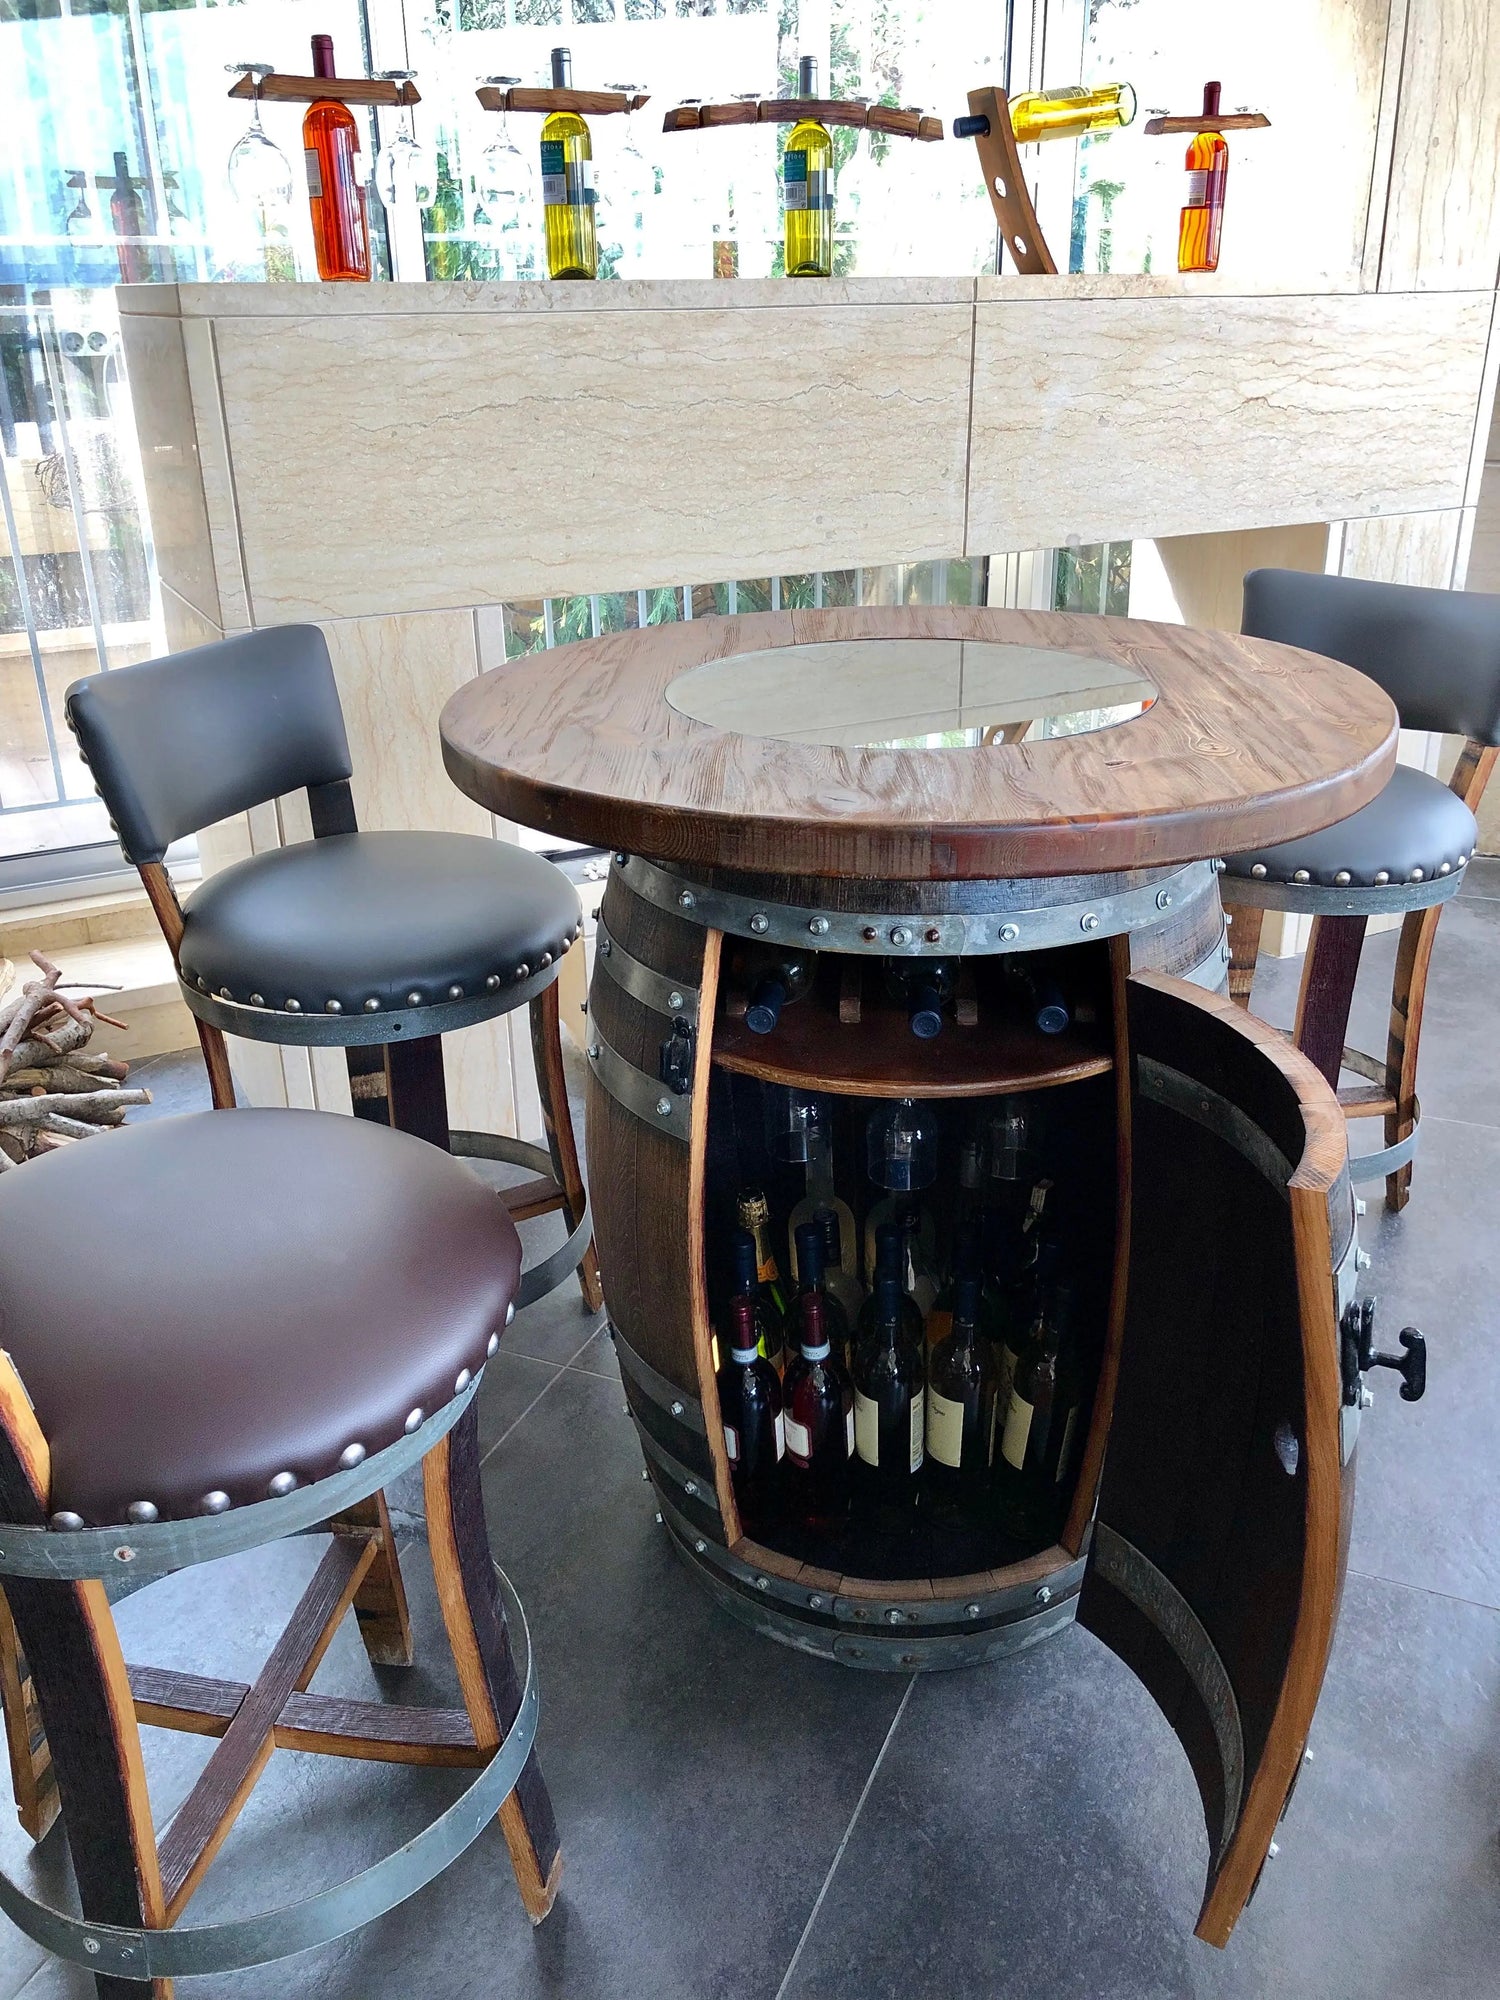 Tips for Choosing the Right Wine Barrel Furniture for Your Home - Oak Wood Wine Barrels